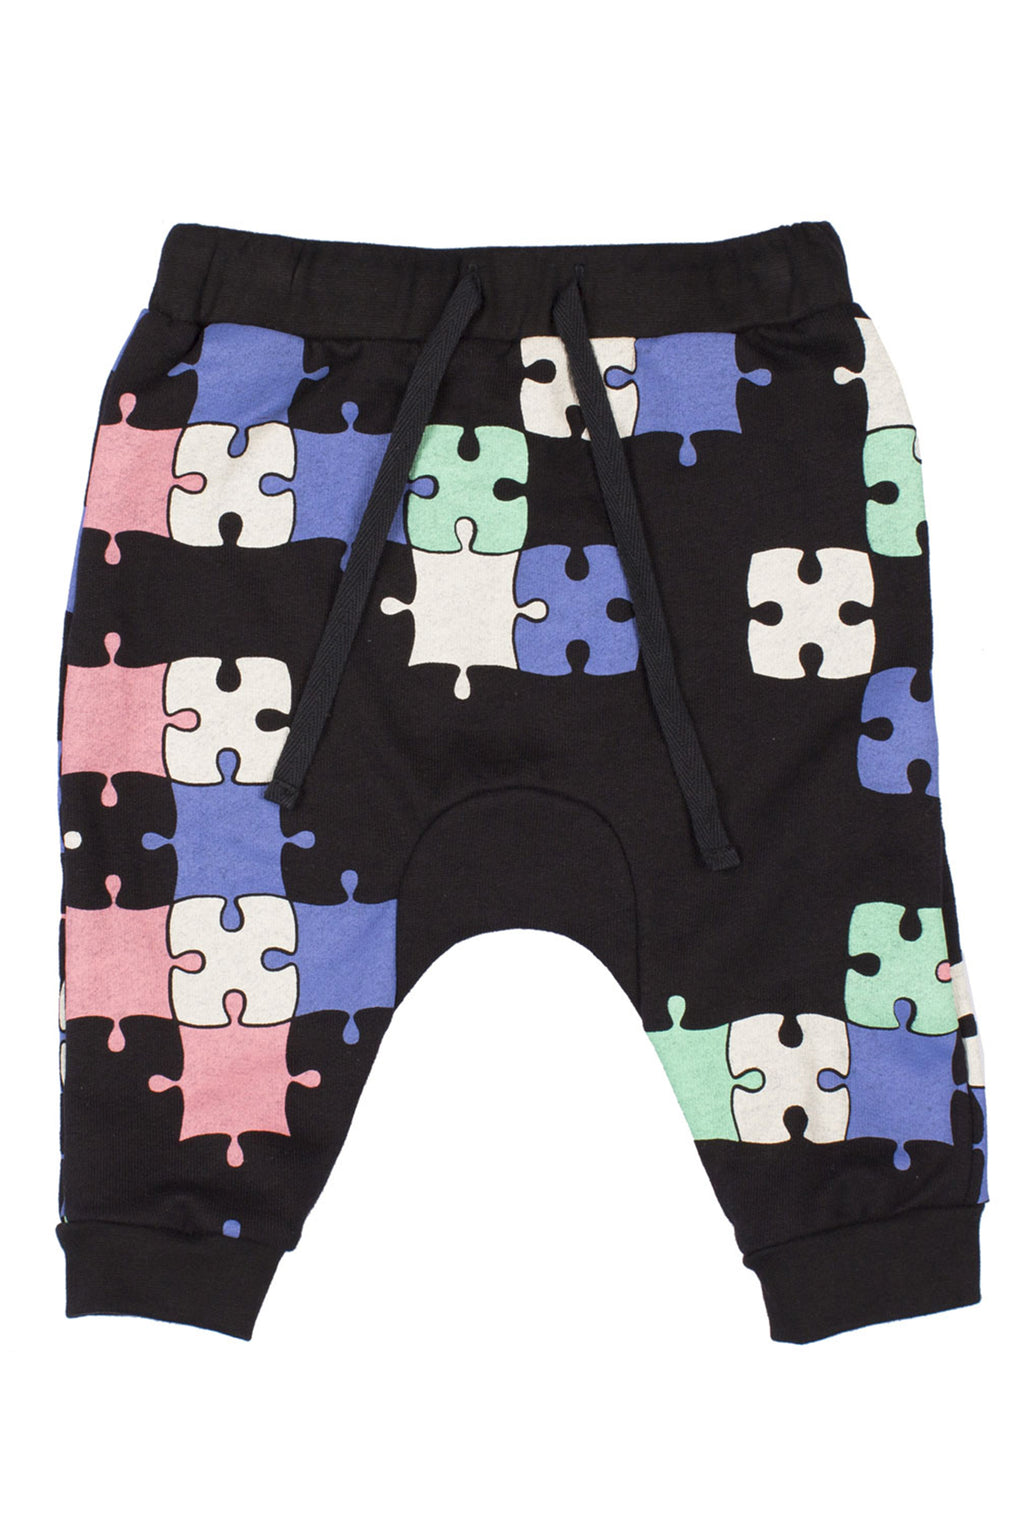 Puzzle Baby Trackie Black/Multi - Zuttion